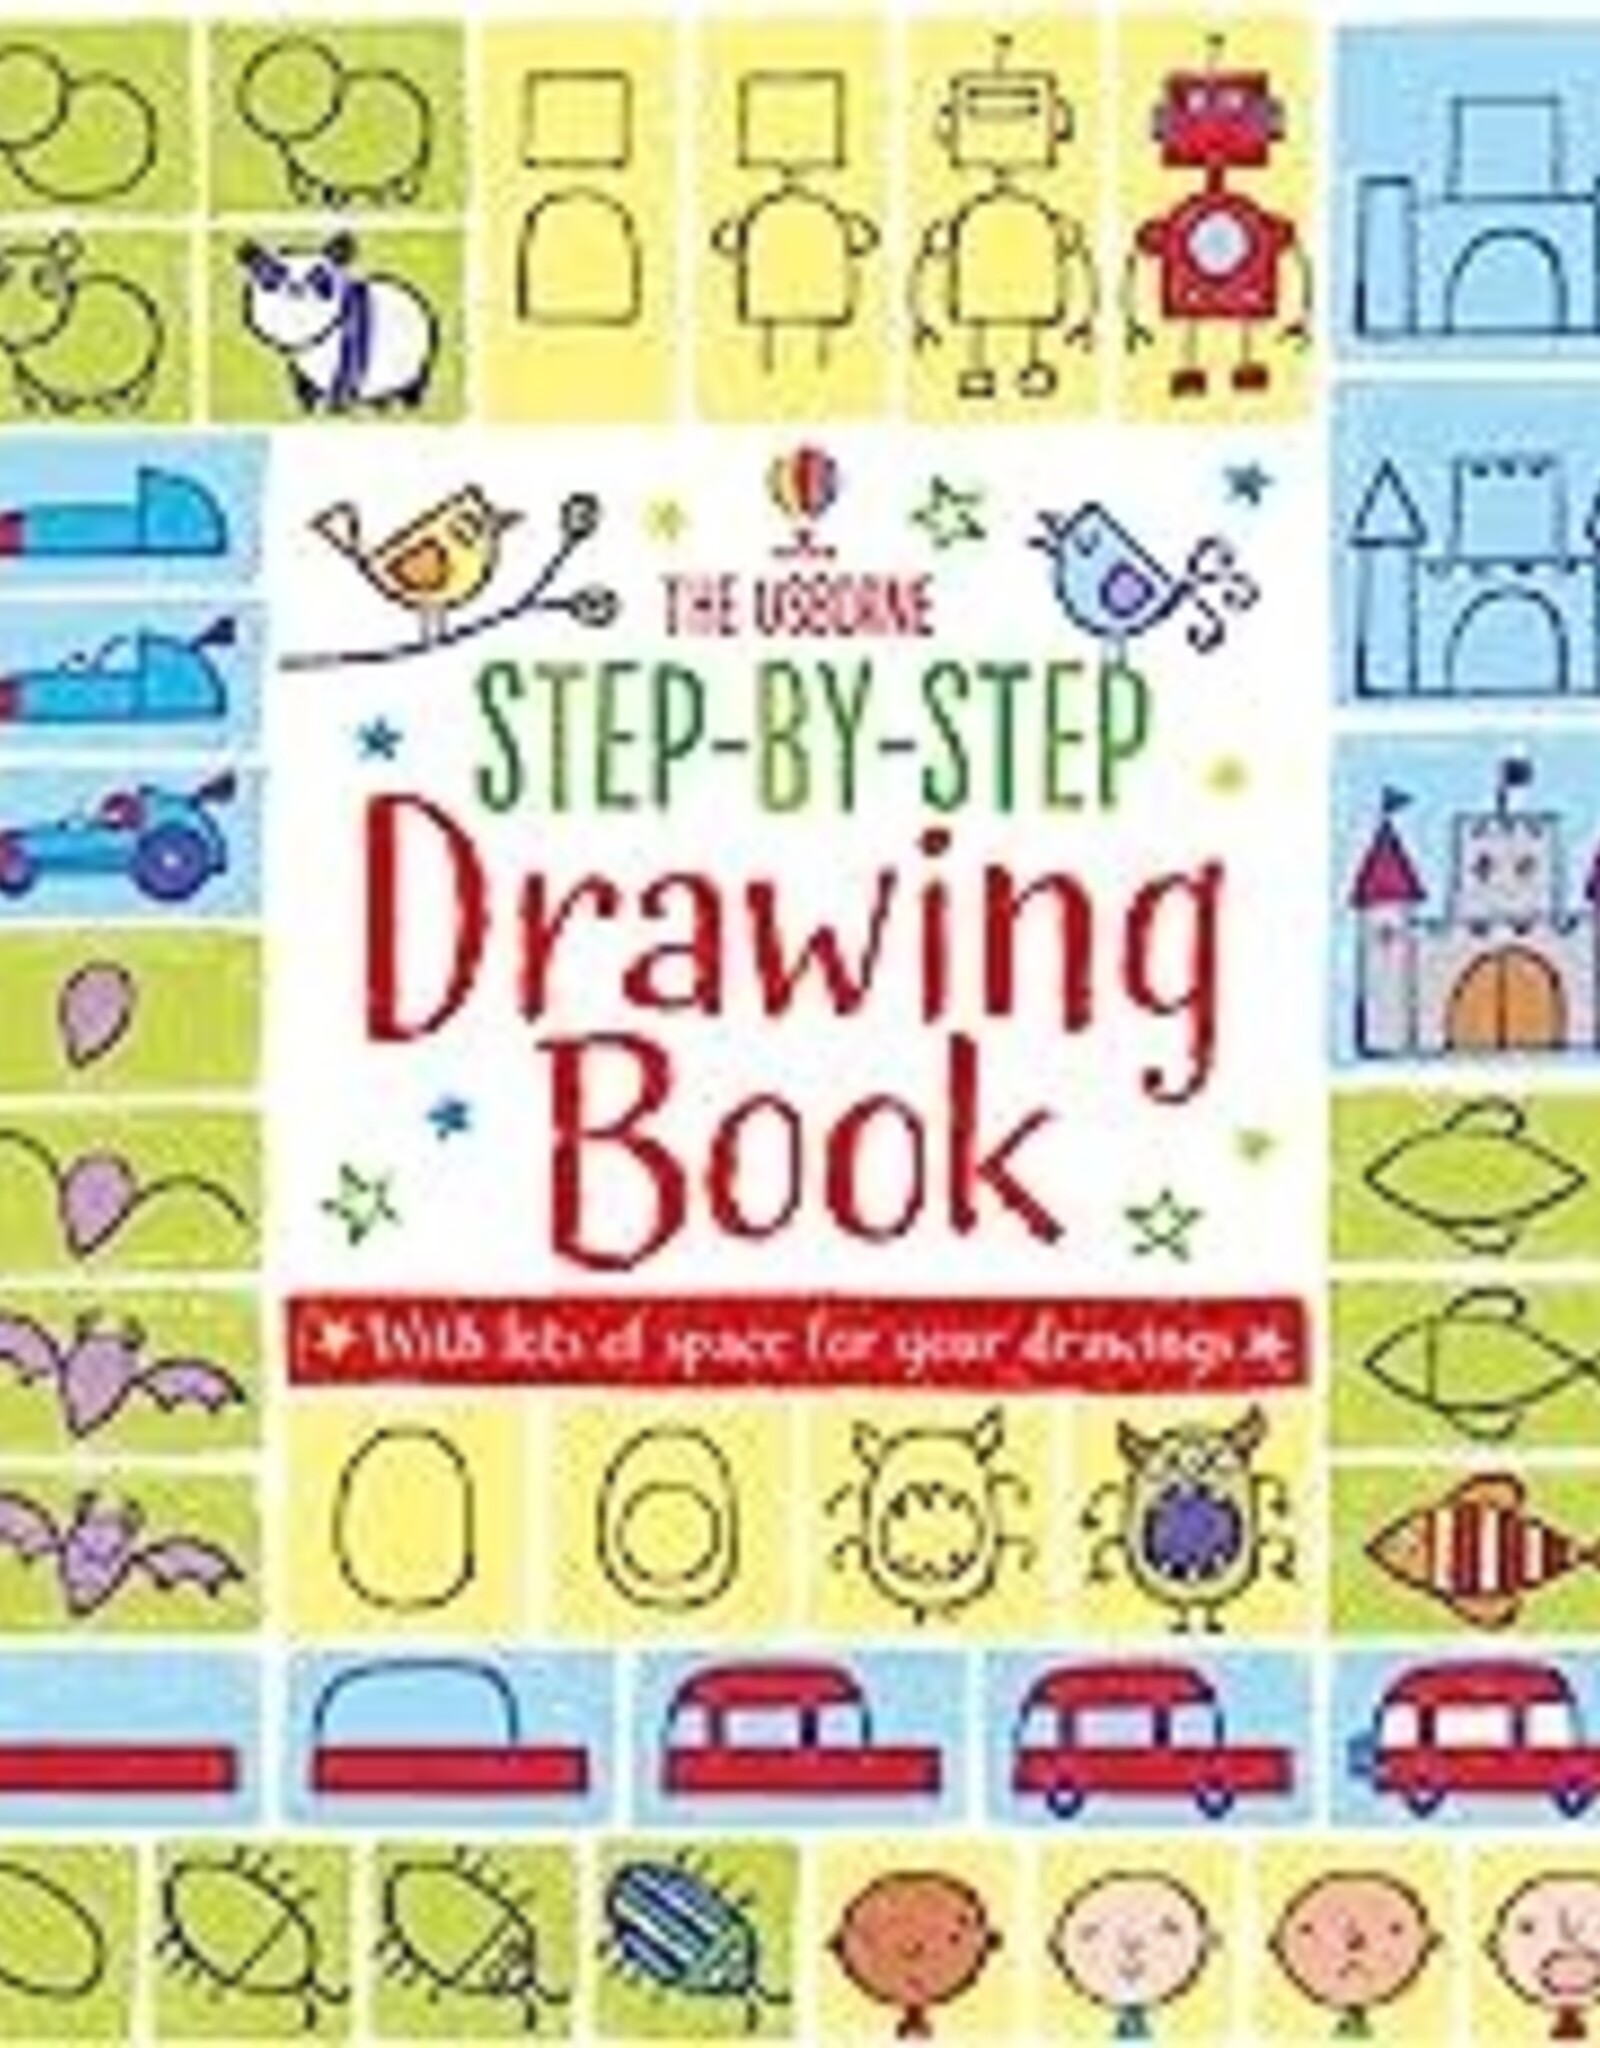 Harper Collins Step By Step Drawing Book